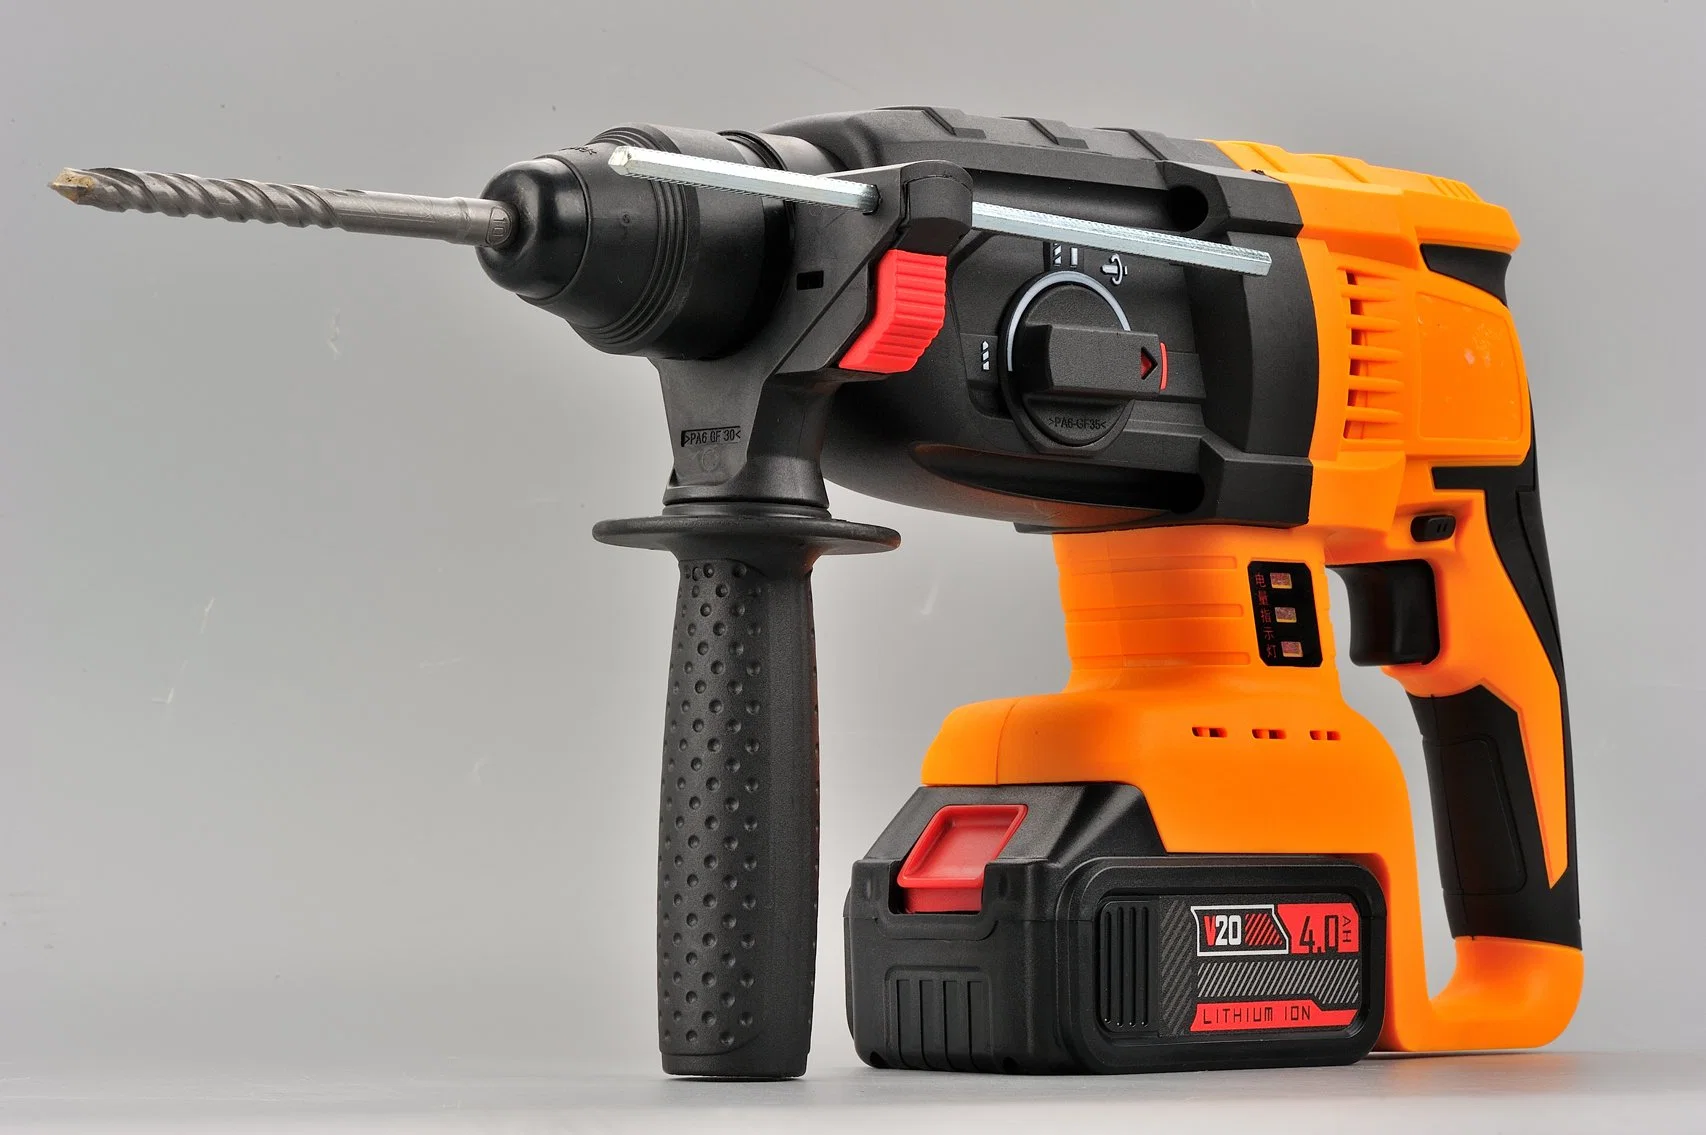 2022hot Power Tool Rotary Hammer The Best Cordless Hammer for DIY